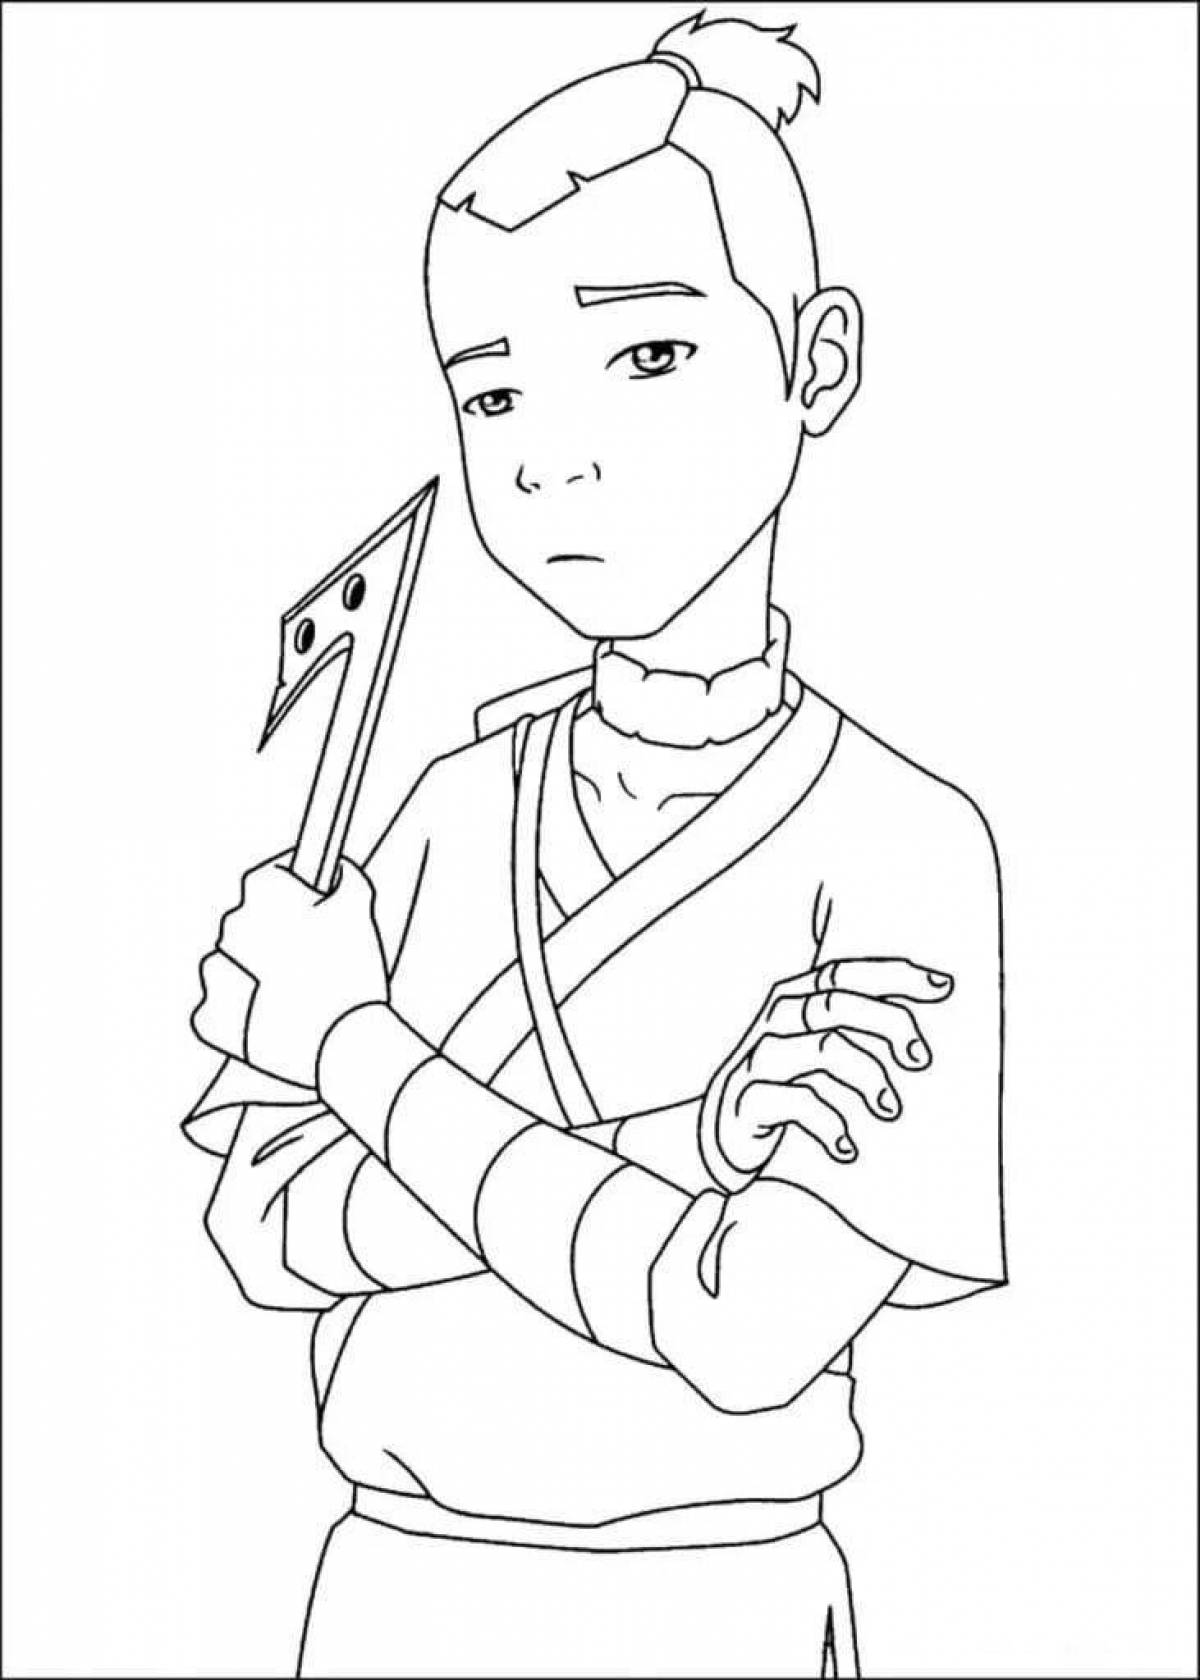 Aang's adorable avatar coloring page